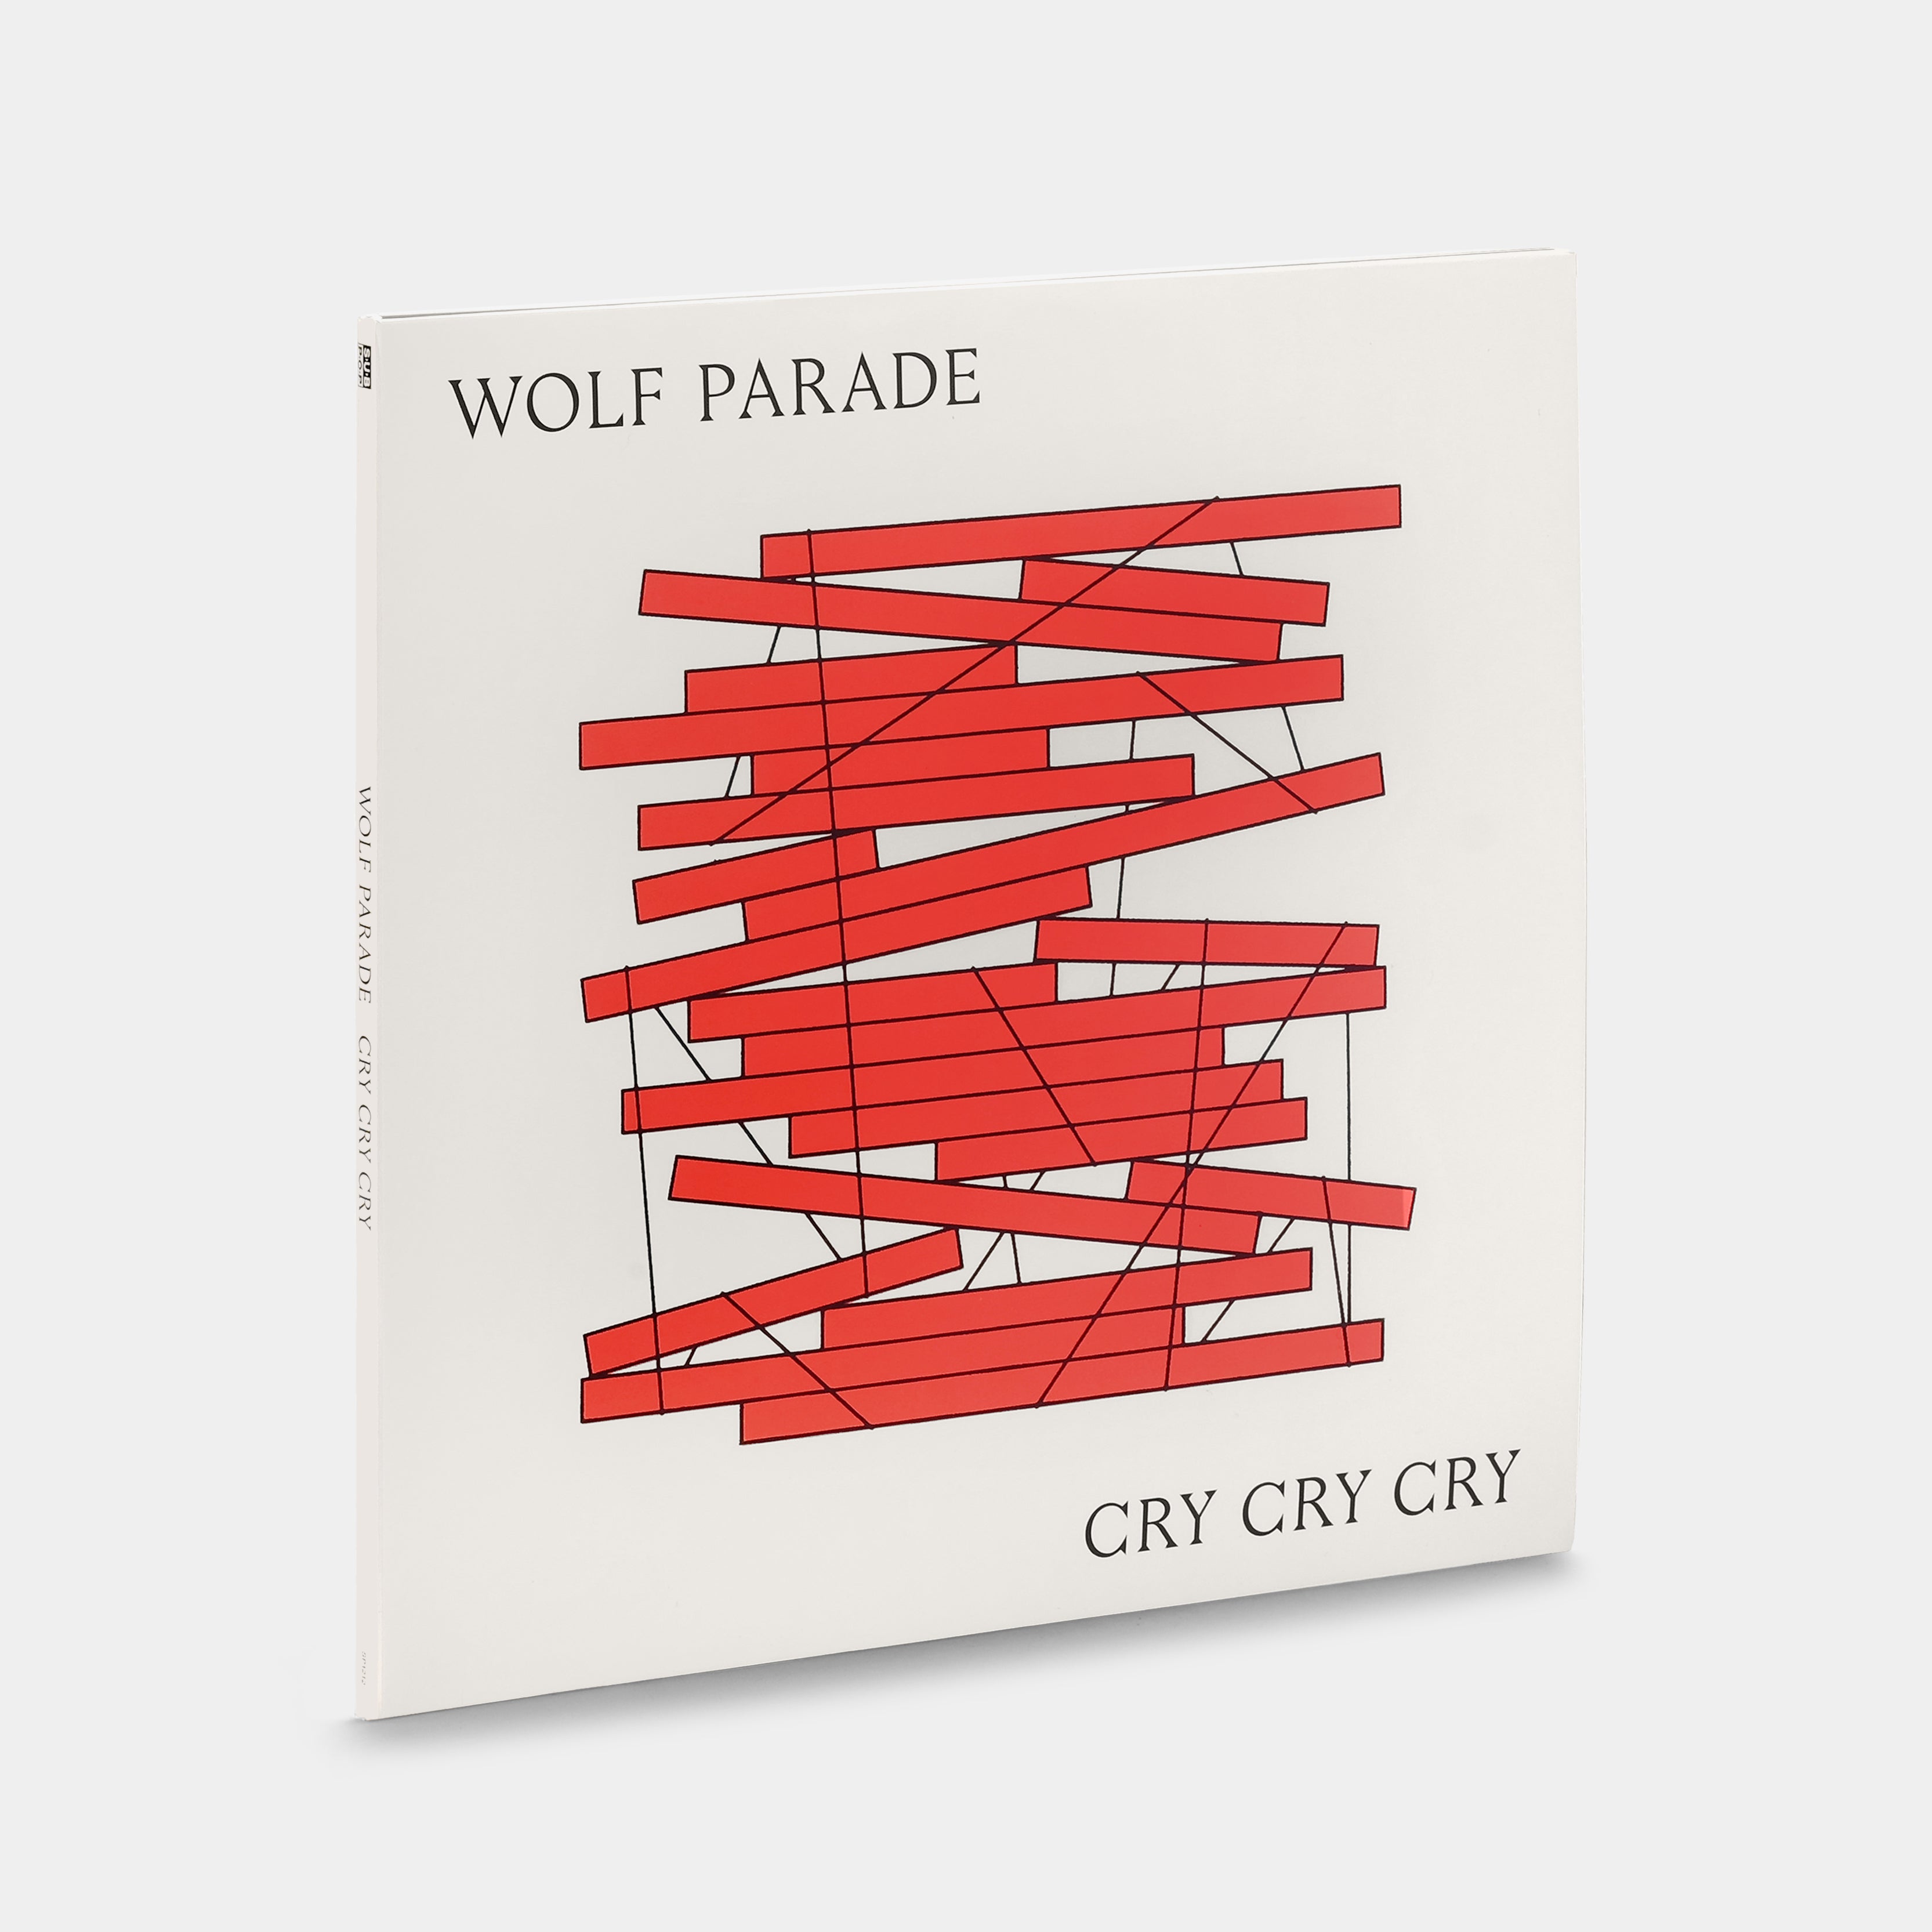 Wolf Parade - Cry Cry Cry 2xLP Vinyl Record